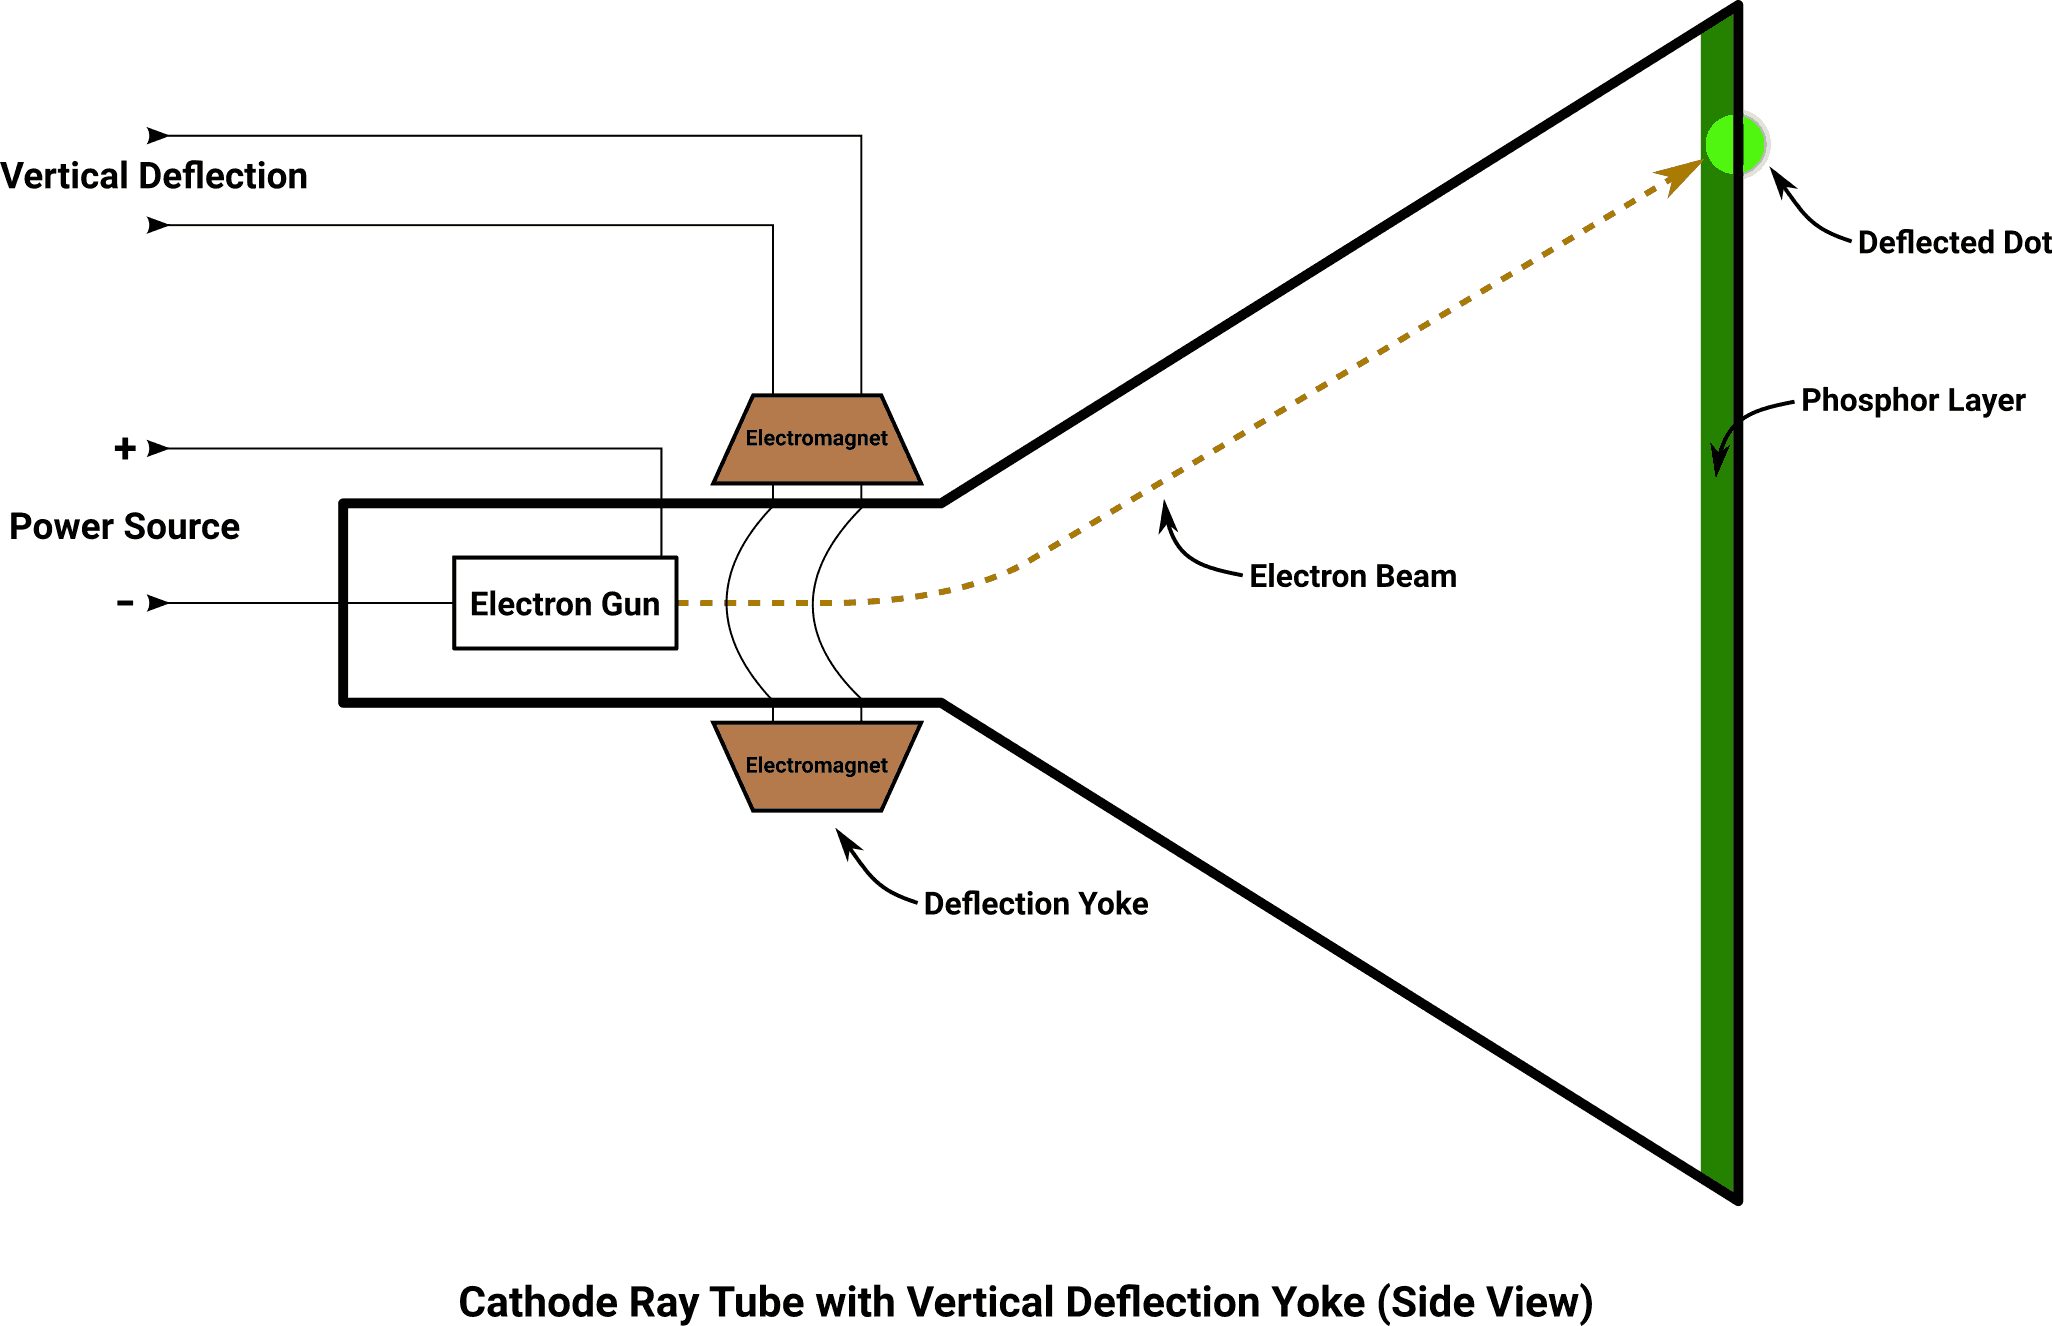 Cathode ray tube with vertical deflection yoke (side view).